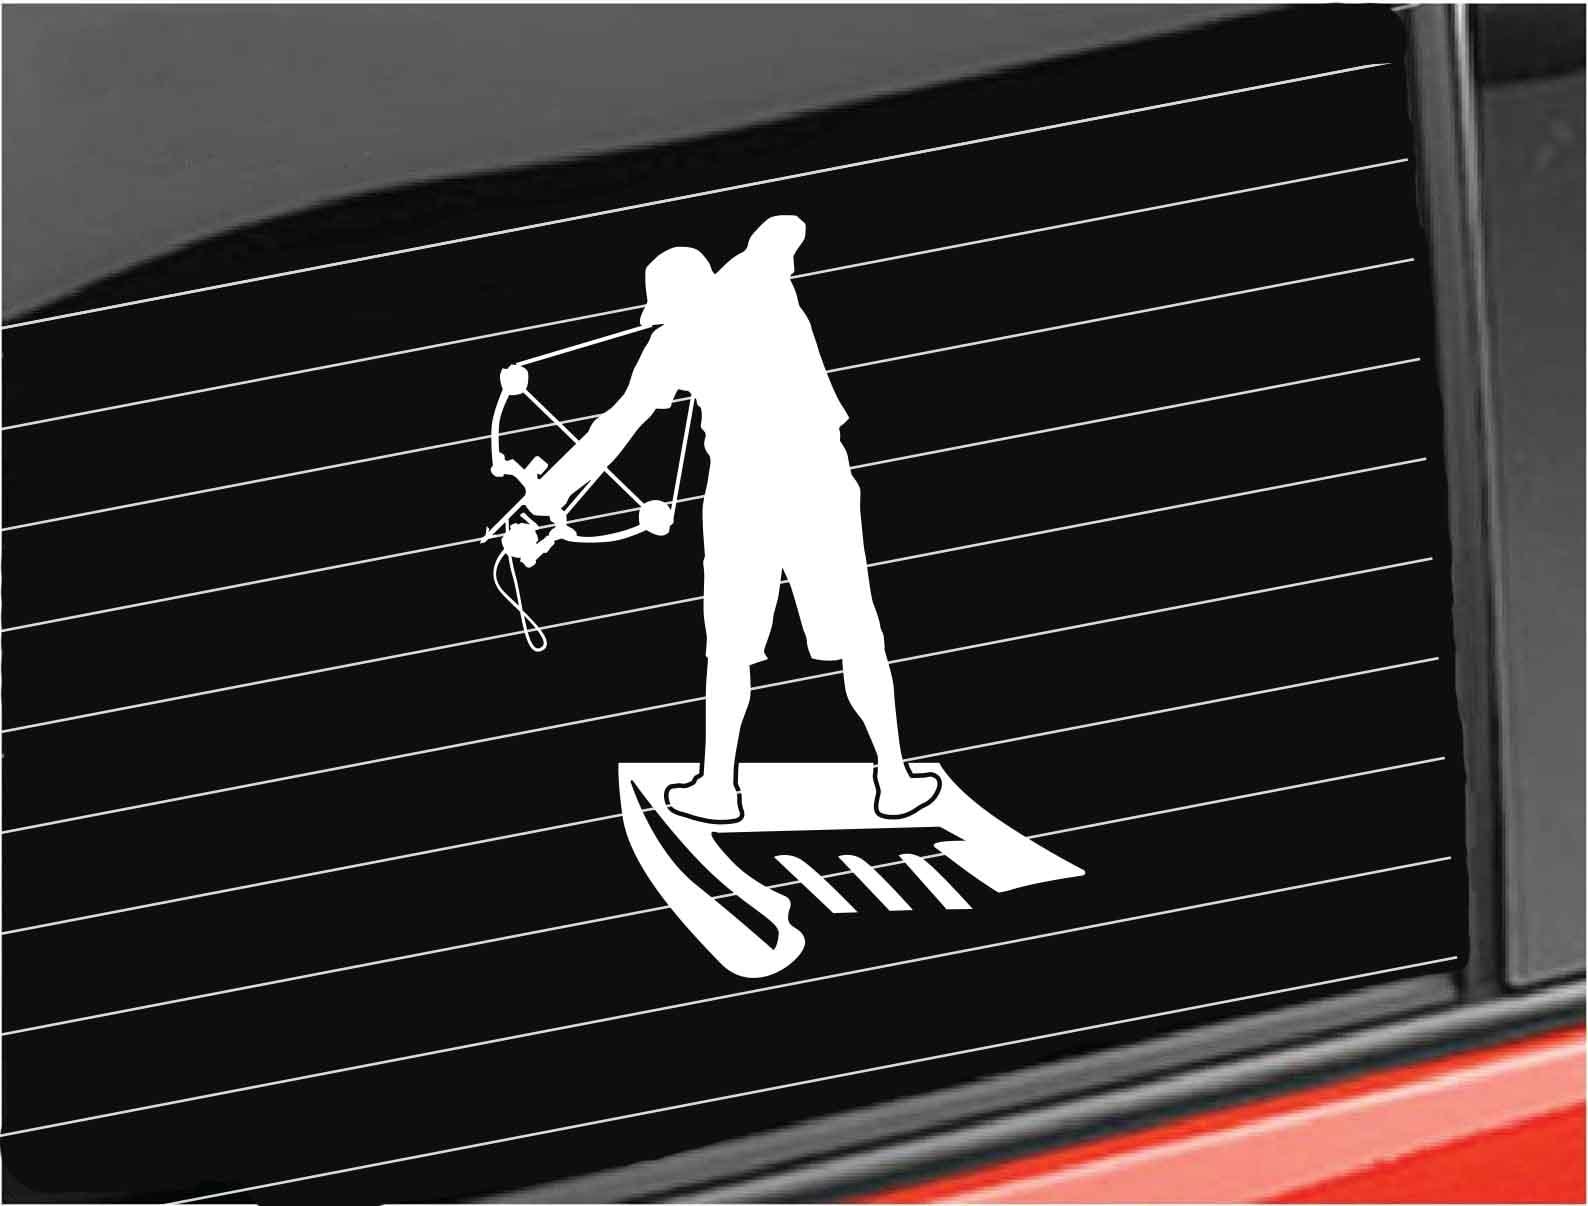 Bow Fishing Vinyl Decal, Bow Fisherman Decal, Guy Bow Fisherman Sticker  Car/truck/laptop/computer/phone/home Vinyl Decal 